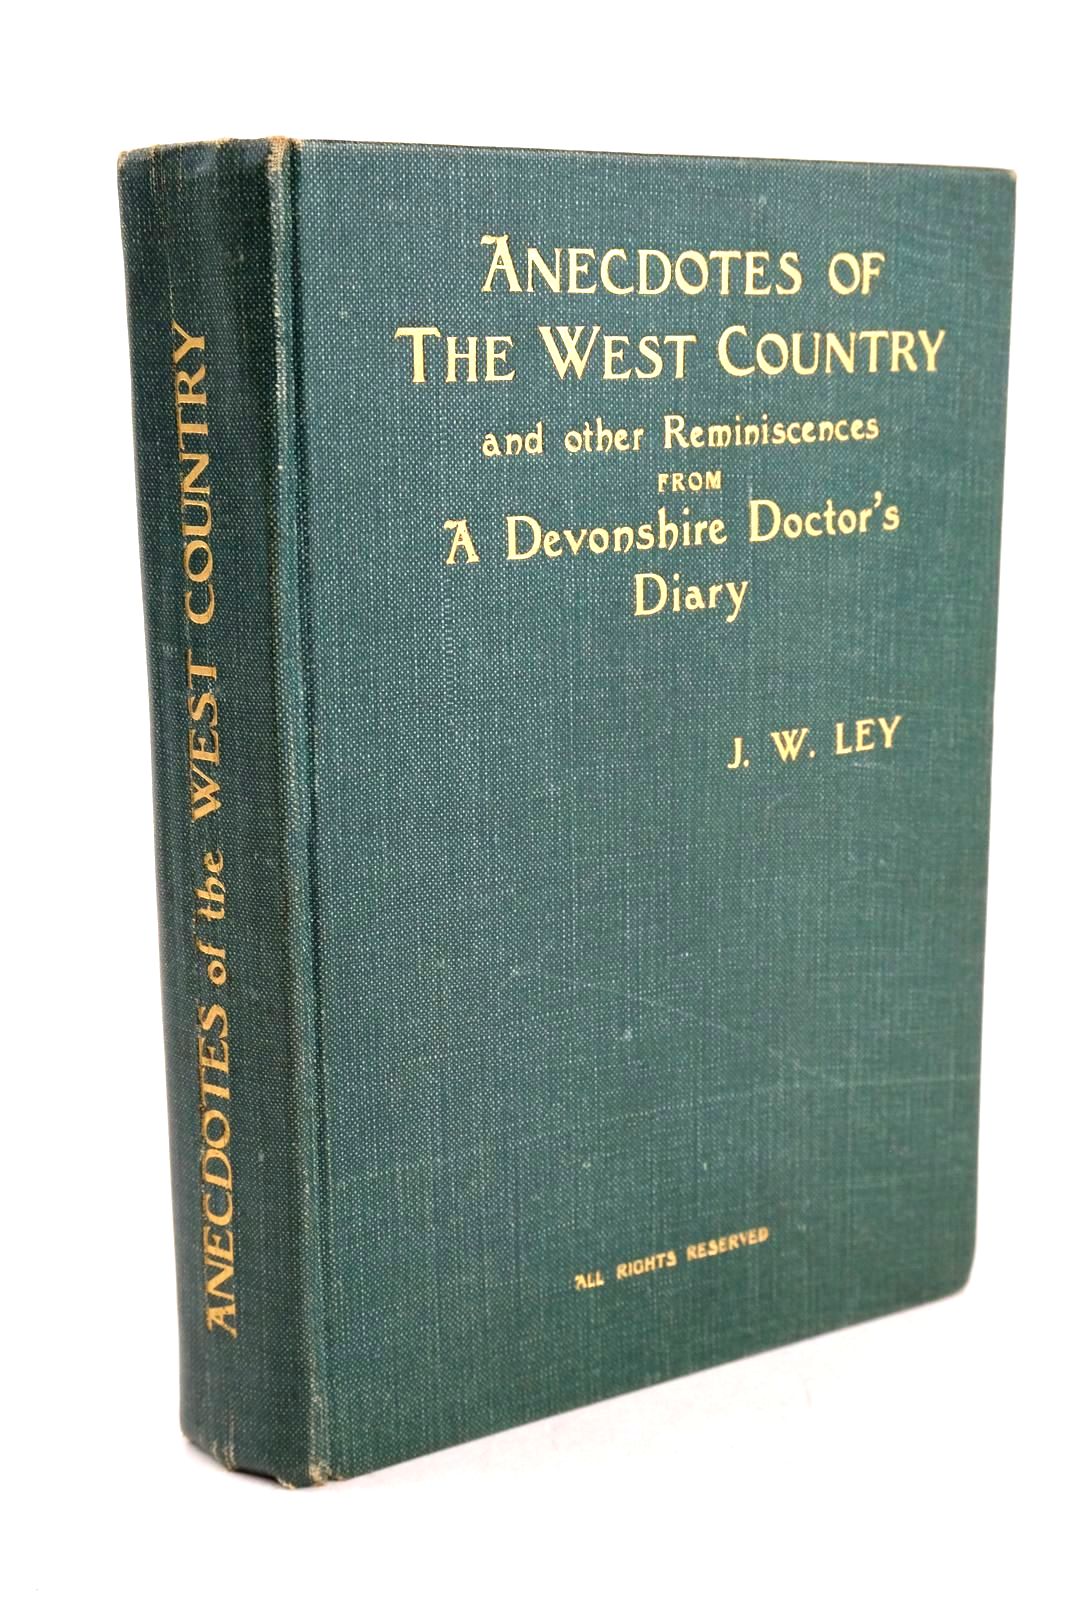 Photo of ANECDOTES OF THE WEST COUNTRY AND OTHER REMINISCENCES FROM A DEVONSHIRE DOCTOR'S DIARY written by Ley, J.W. published by J.W. Ley (STOCK CODE: 1326577)  for sale by Stella & Rose's Books